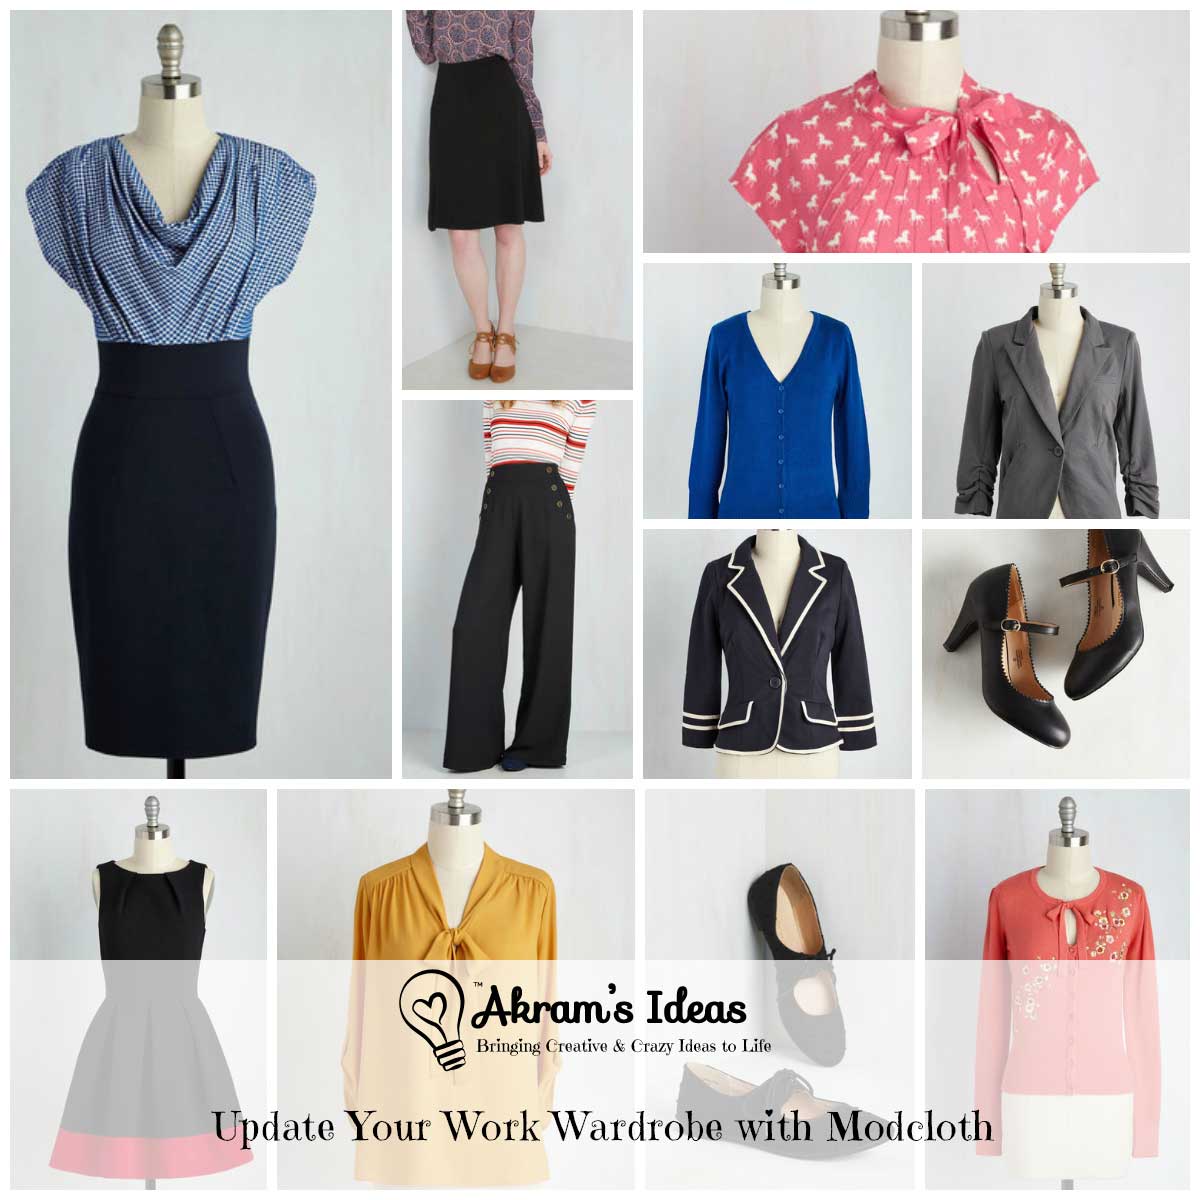 Is your style resume in need of an update? Give your work wardrobe the promotion it deserves, with help from Modcloth.